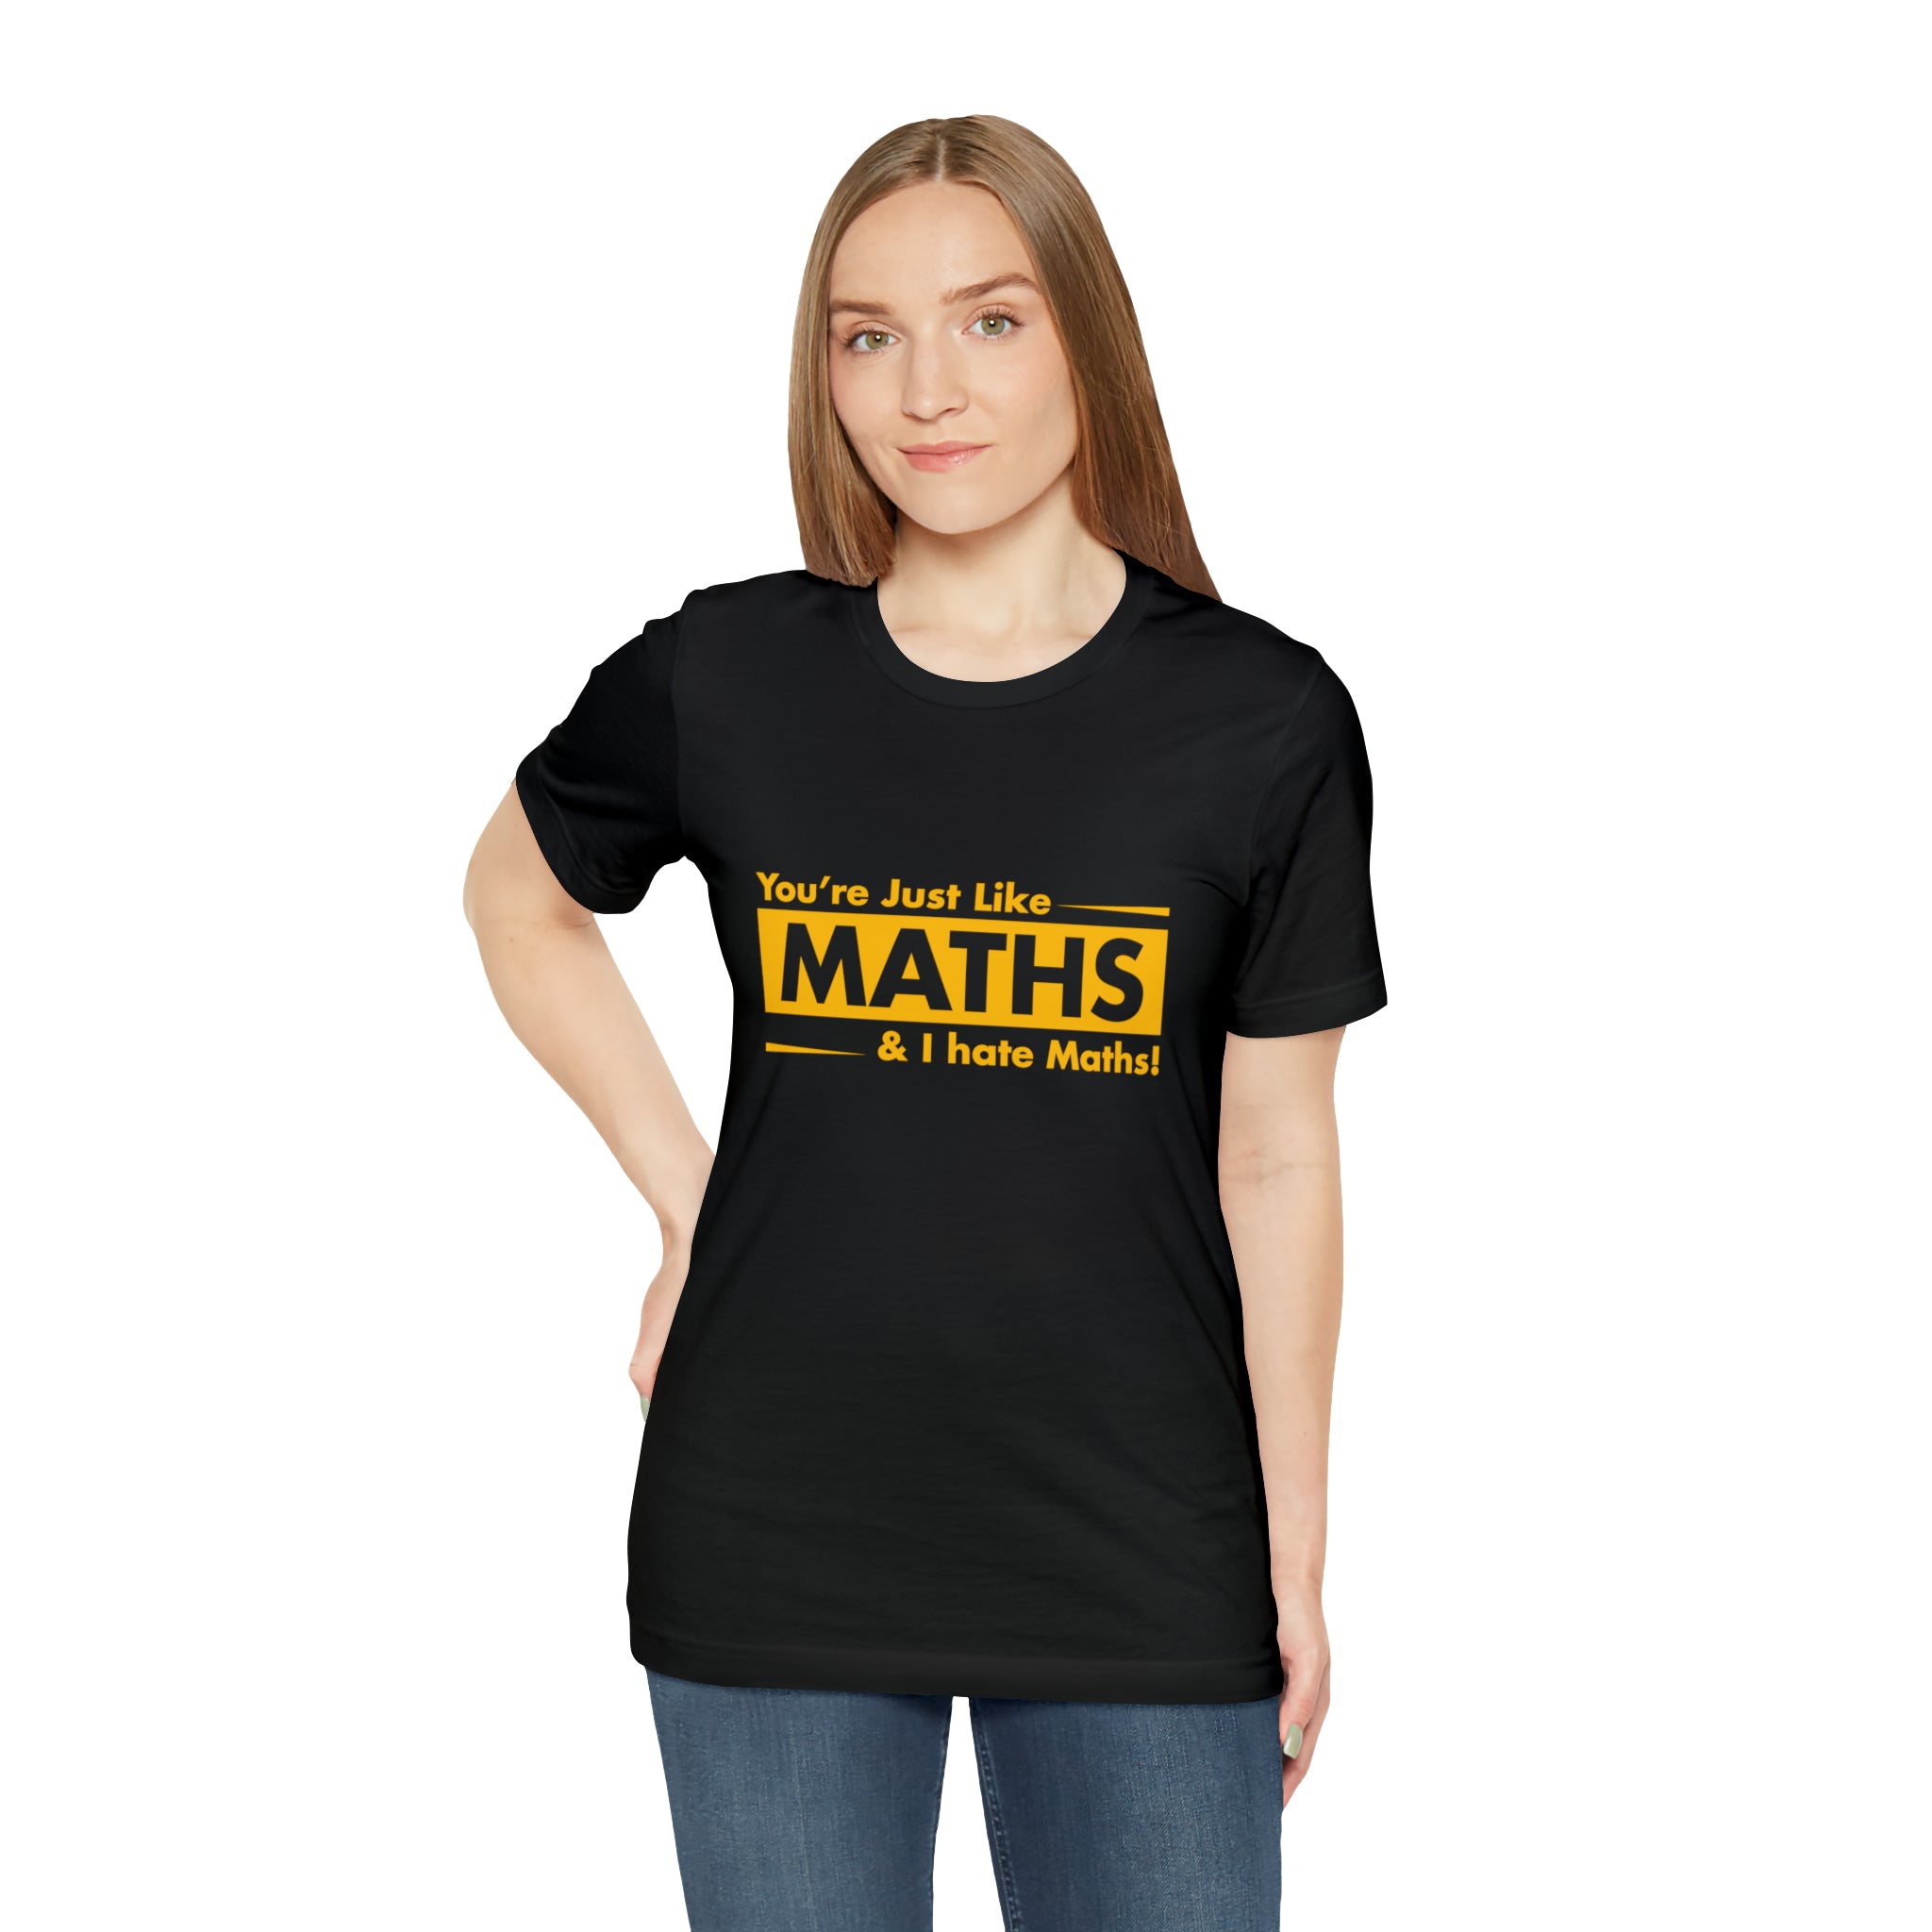 A woman flaunting her fashion sense in a stylish black "You are just like maths and I hate maths" T-shirt that proudly displays her love for maths.